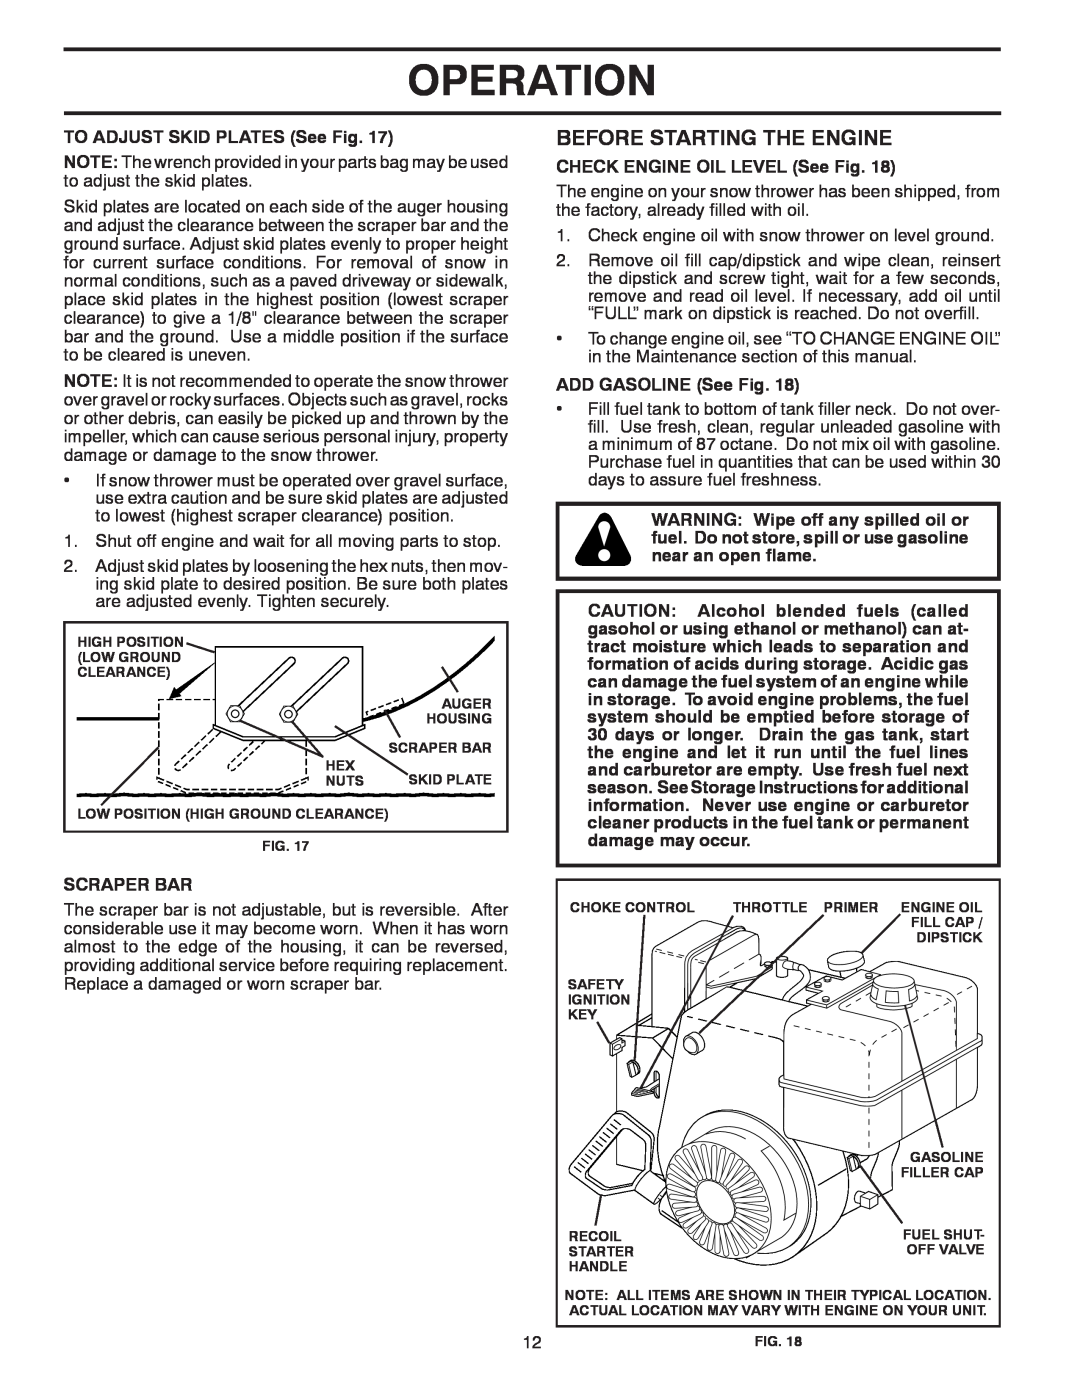 Poulan 421104 Before Starting The Engine, Operation, TO ADJUST SKID PLATES See Fig, CHECK ENGINE OIL LEVEL See Fig 